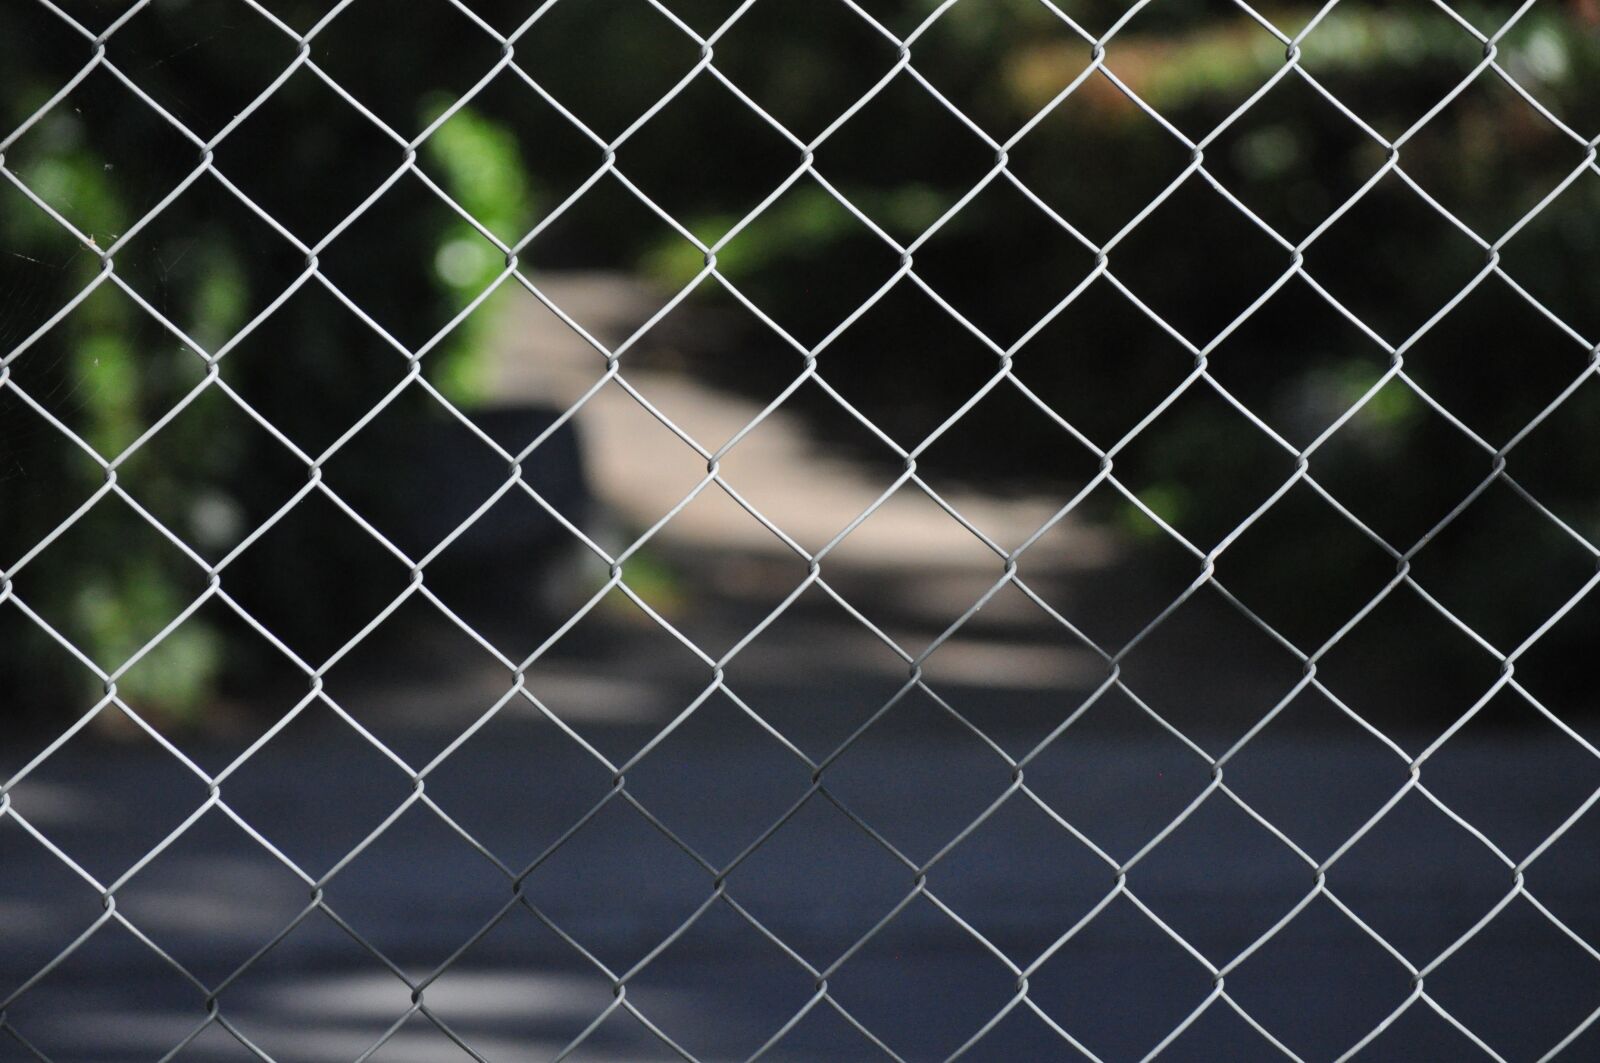 Nikon D5000 sample photo. Fence, steel wire, chain photography